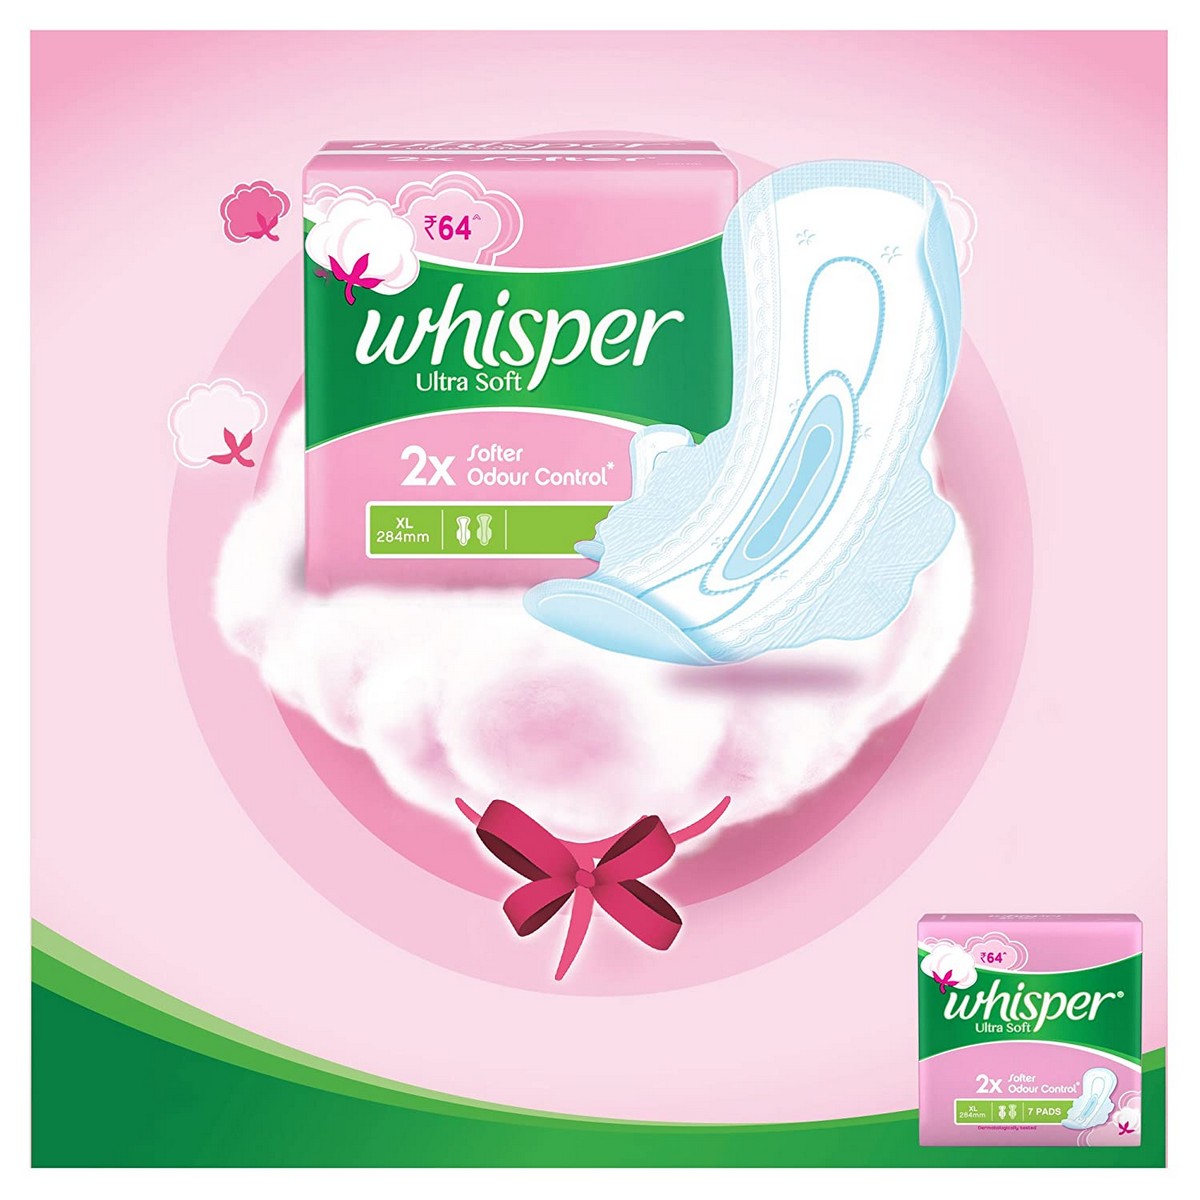 Whisper Ultra Soft Sanitary Pads for Women- 30 Pieces (XL Plus) 